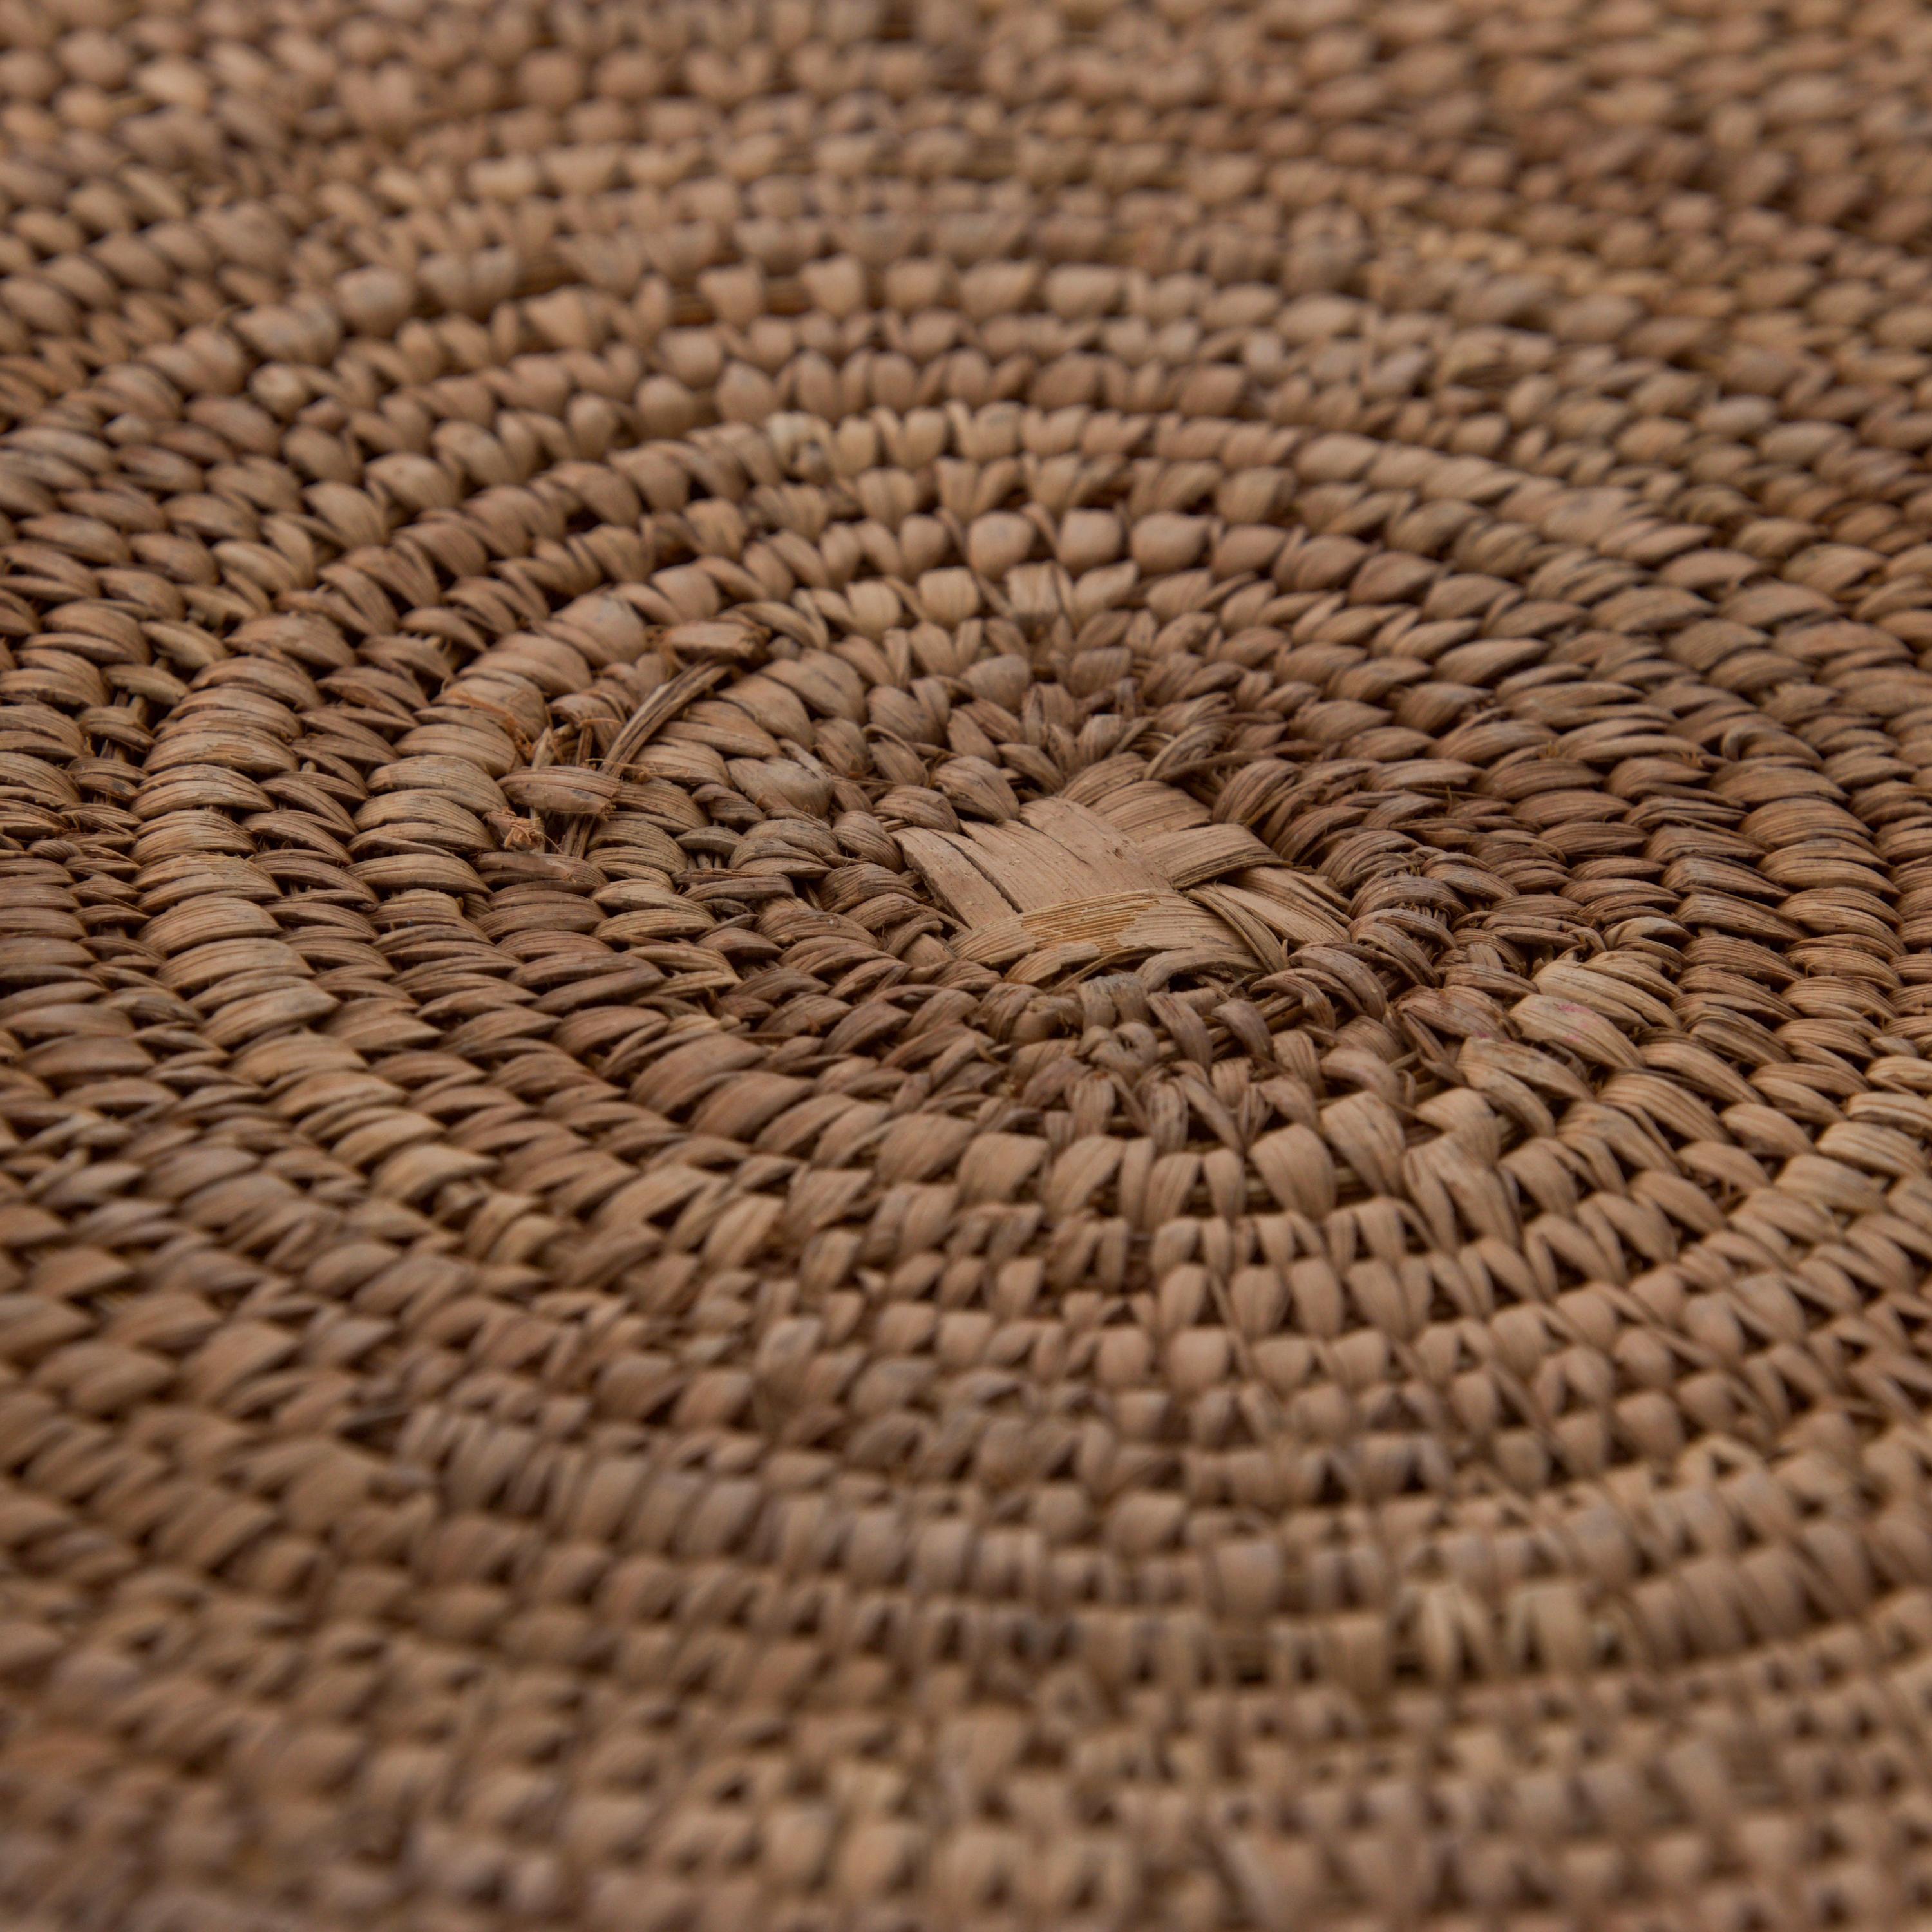 North American Native American Indian Handmade Woven Large Flat Coiled Saucer Basket Tray 1930s